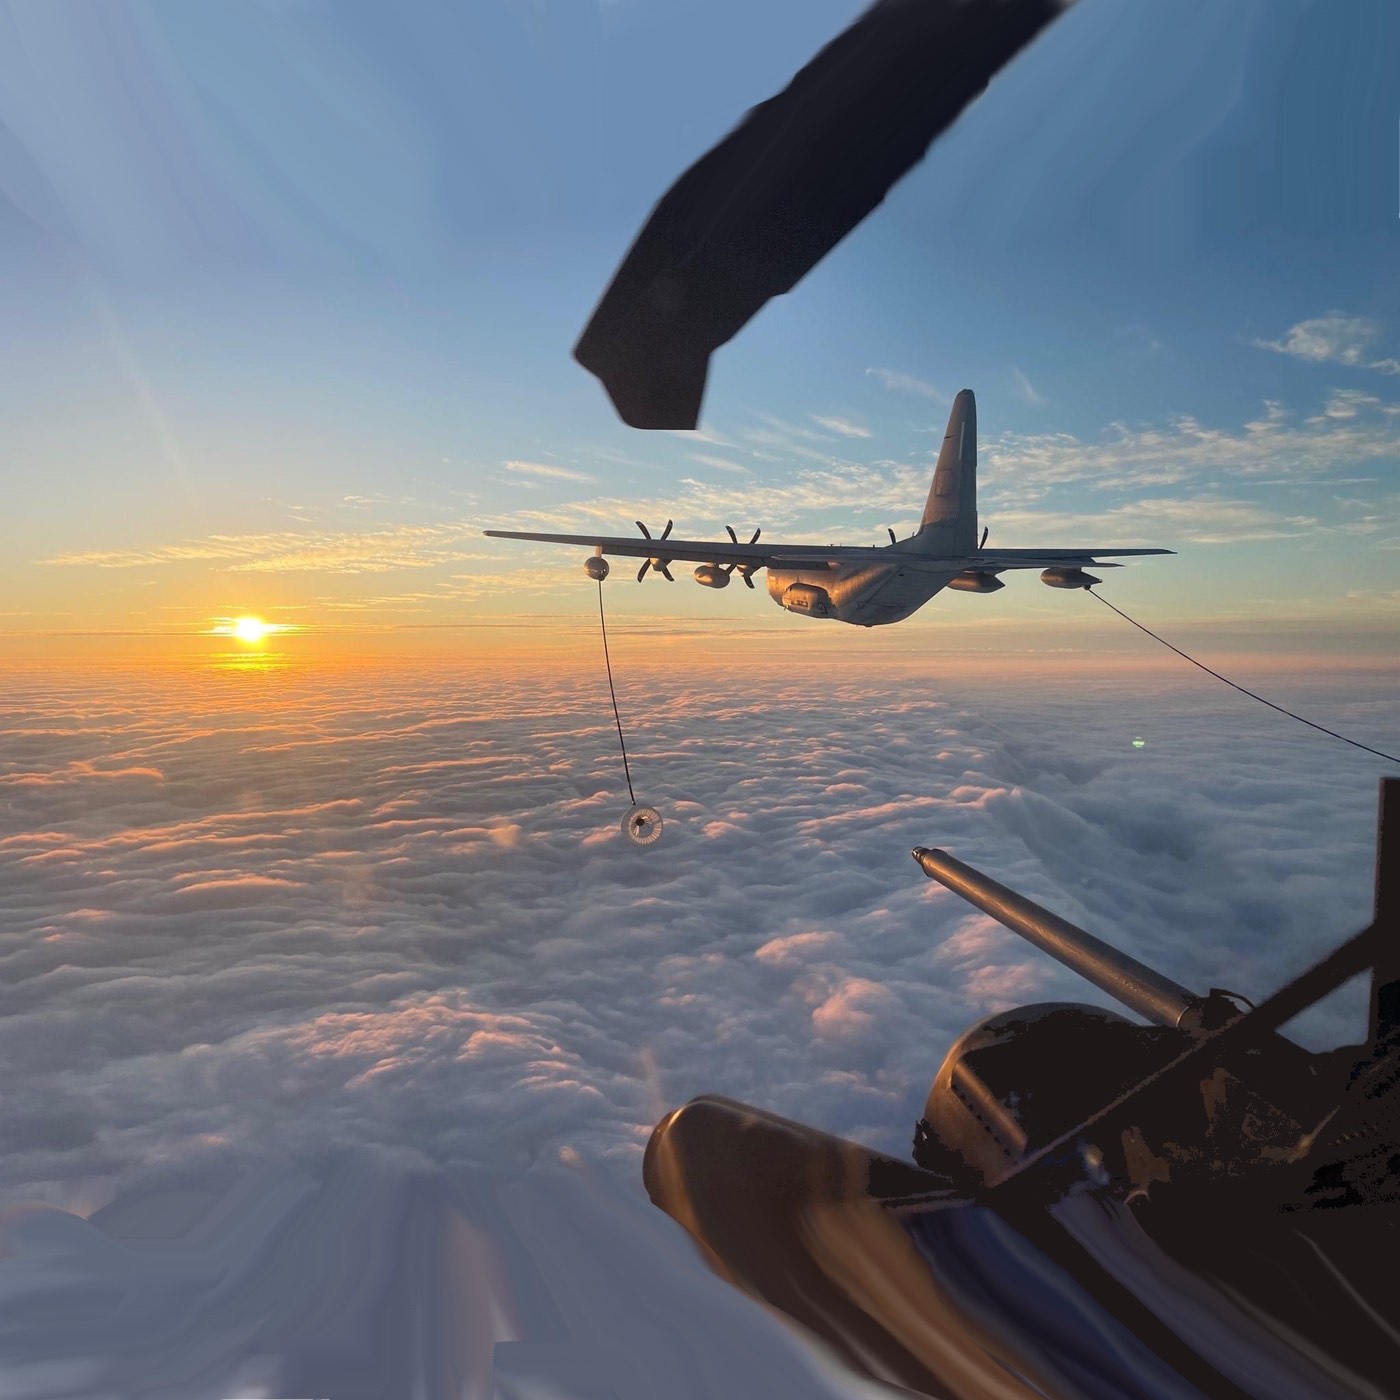 C-130 the Mighty Herc Refueling